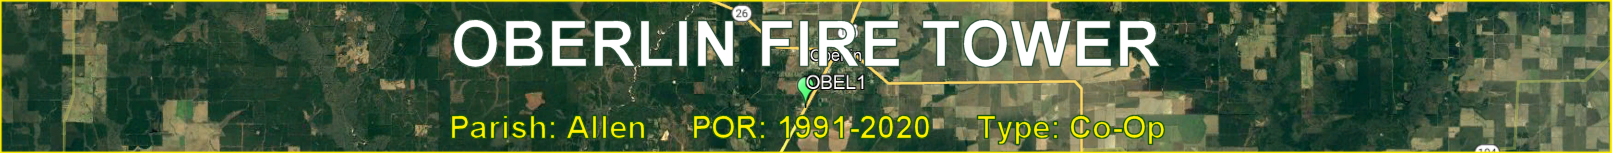 Title image for Oberlin Fire Tower